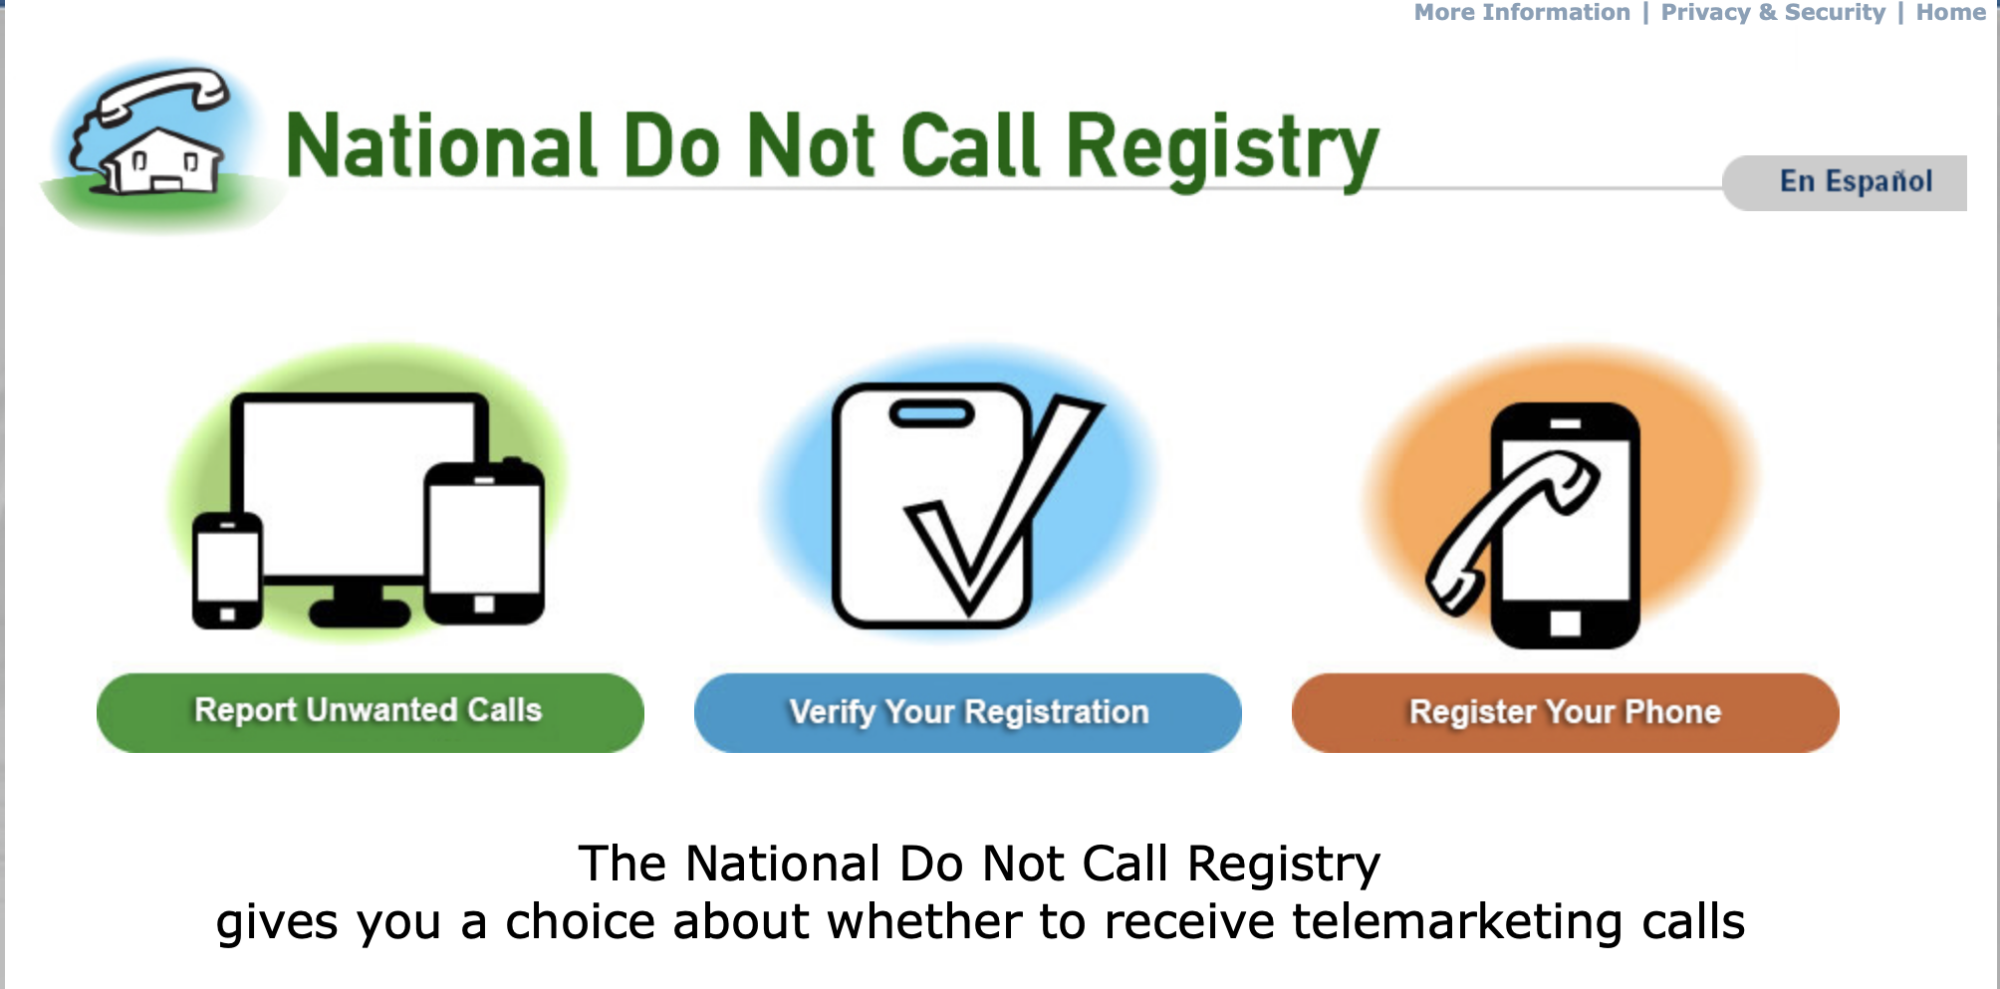 Options from the National Call Registry on reporting calls, registering your phone, and verifying registration